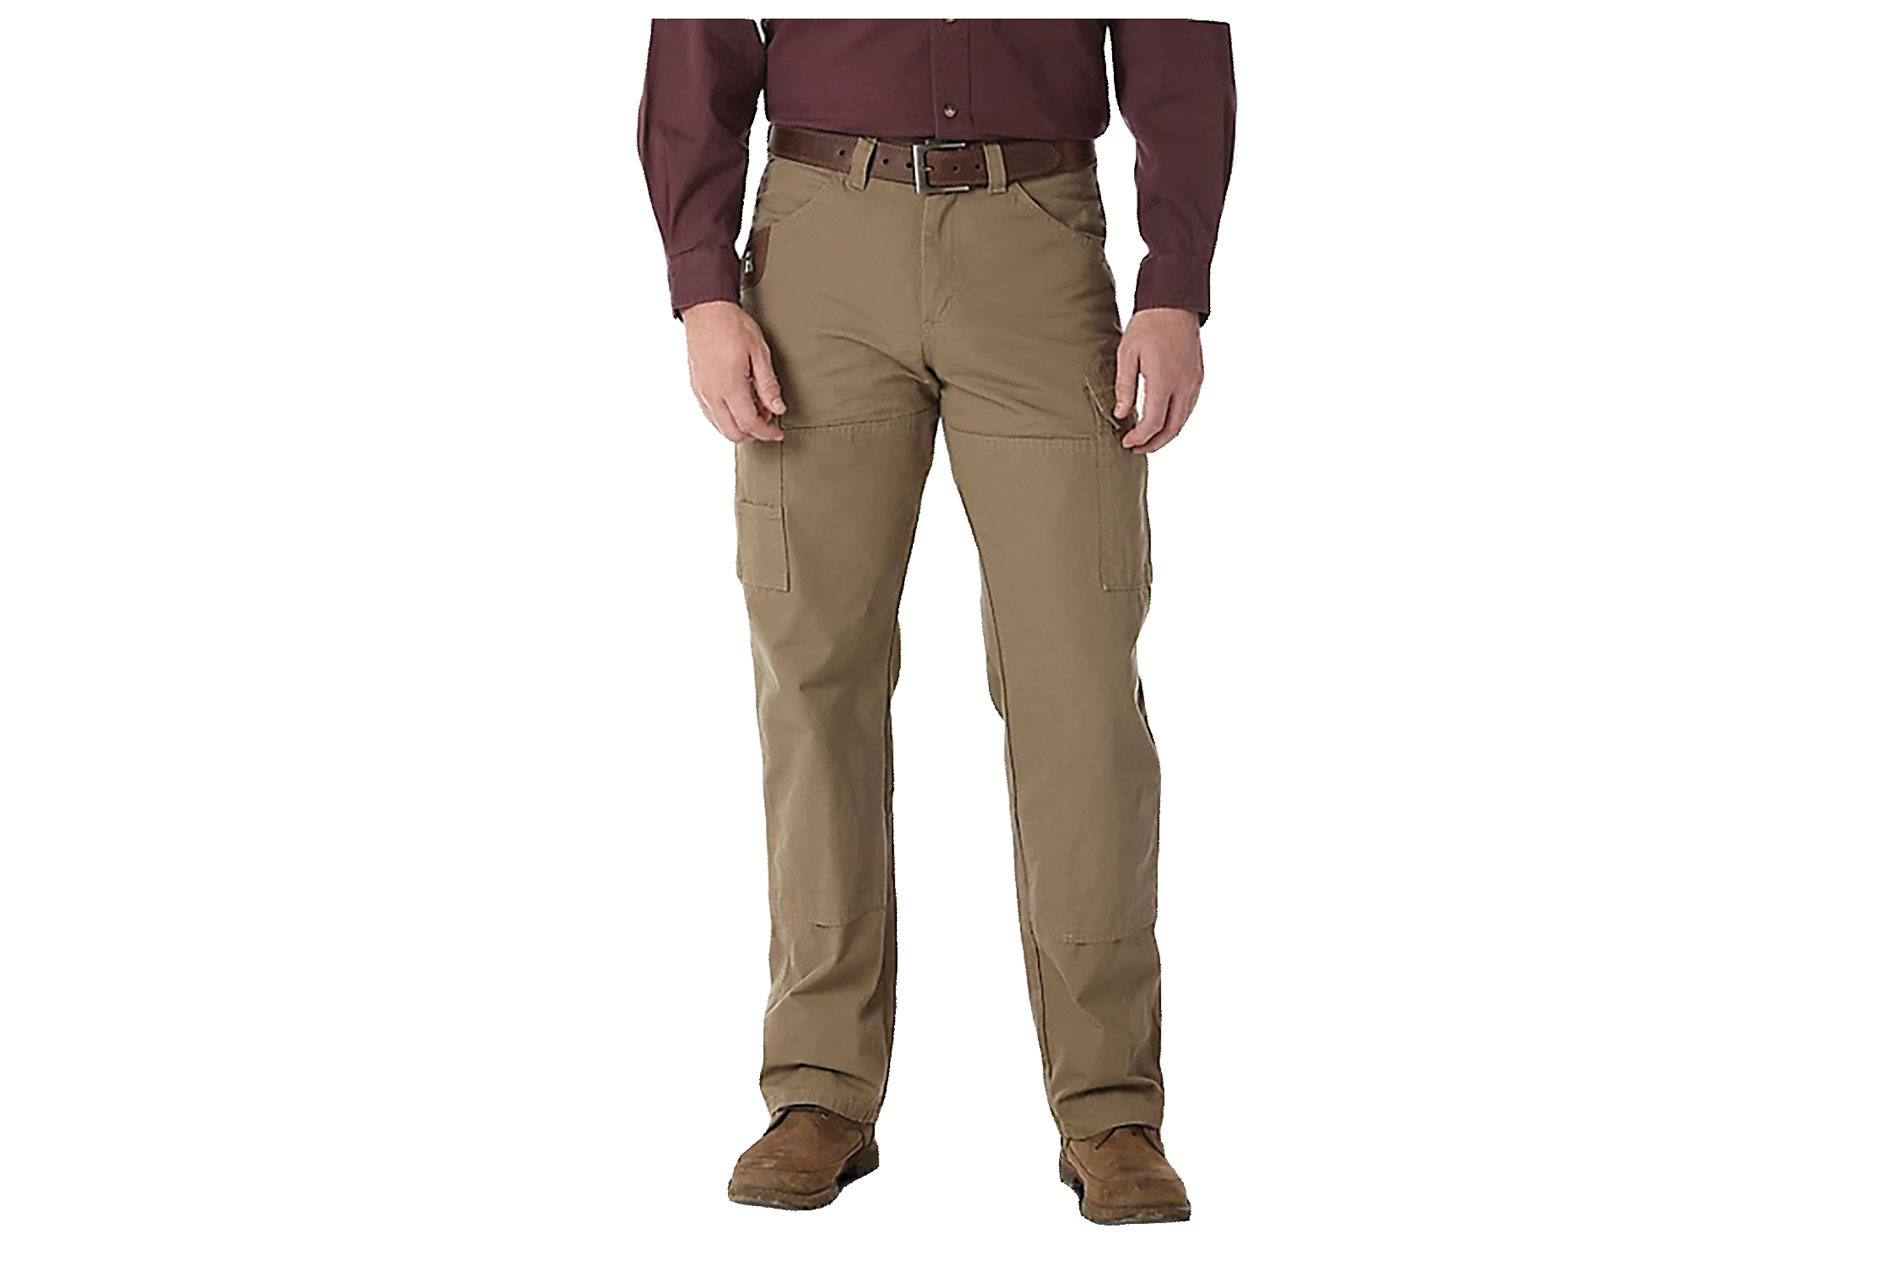 A man wears brown pants. Image by Wrangler.